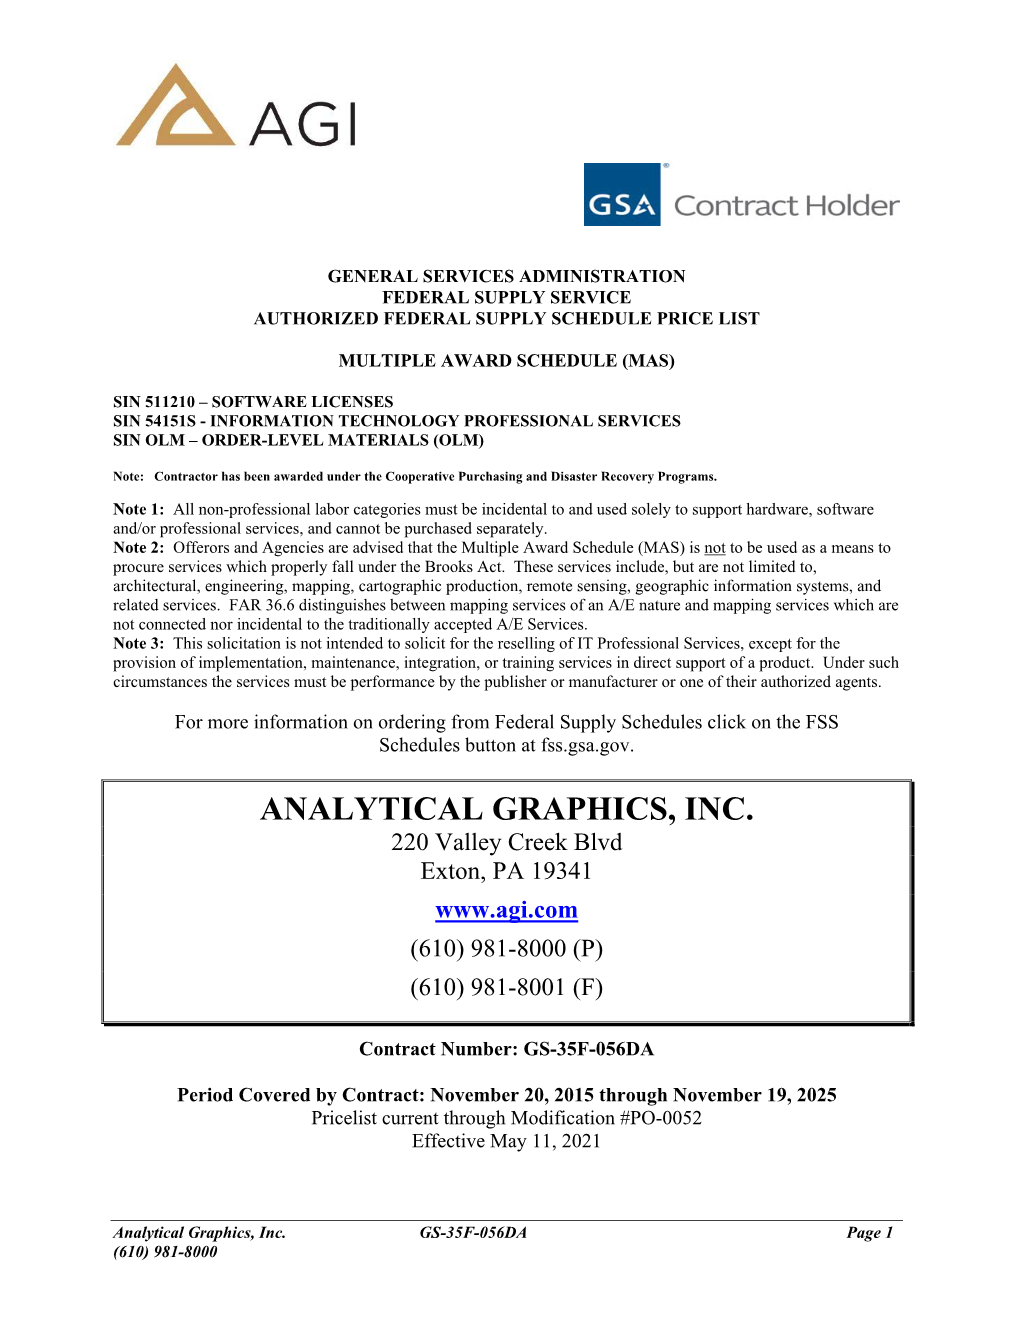 ANALYTICAL GRAPHICS, INC. 220 Valley Creek Blvd Exton, PA 19341 (610) 981-8000 (P) (610) 981-8001 (F)